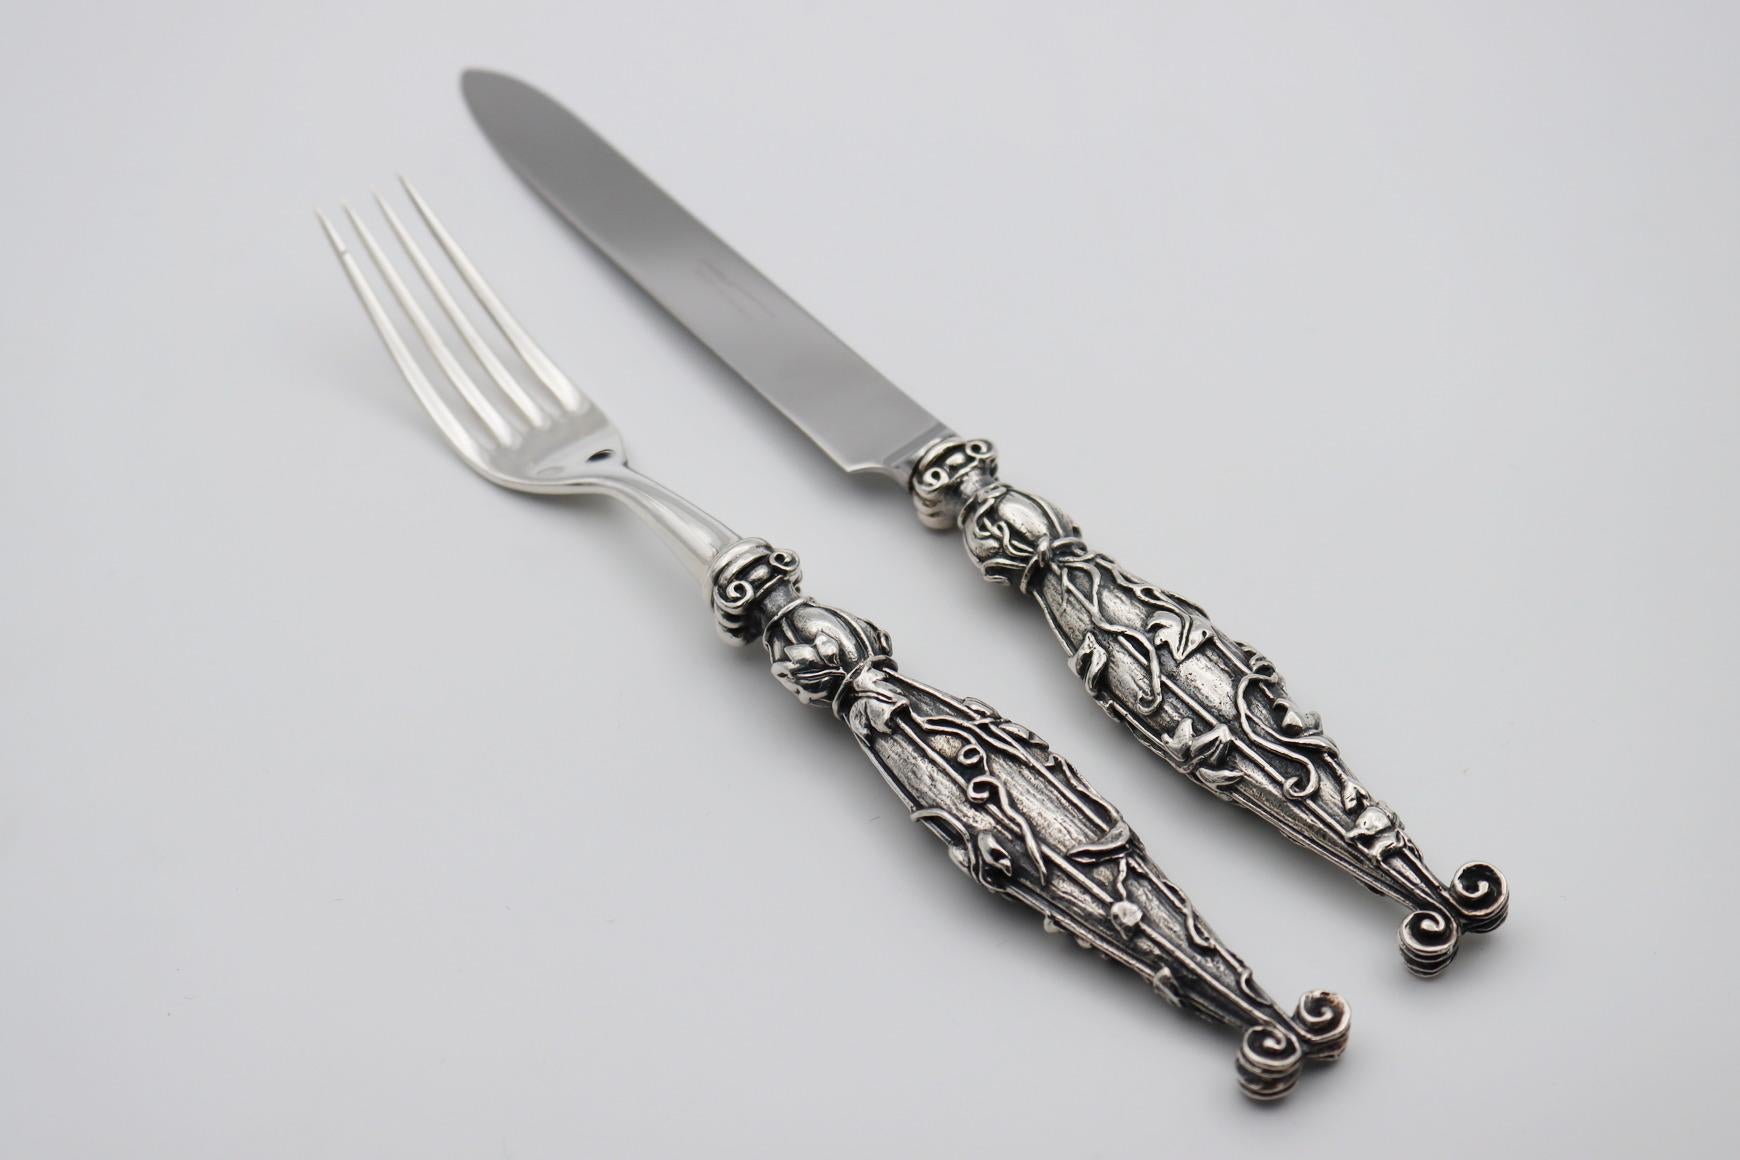 VILLA D’ESTE Set of 2 pieces in Silver Bronze or Gold Bronze

Set of 2 pieces (table forks/fish, table knife or meat/fish knife) in silver bronze 35/42 microns

It is possible to order all products separately or set of 4 piece

Table